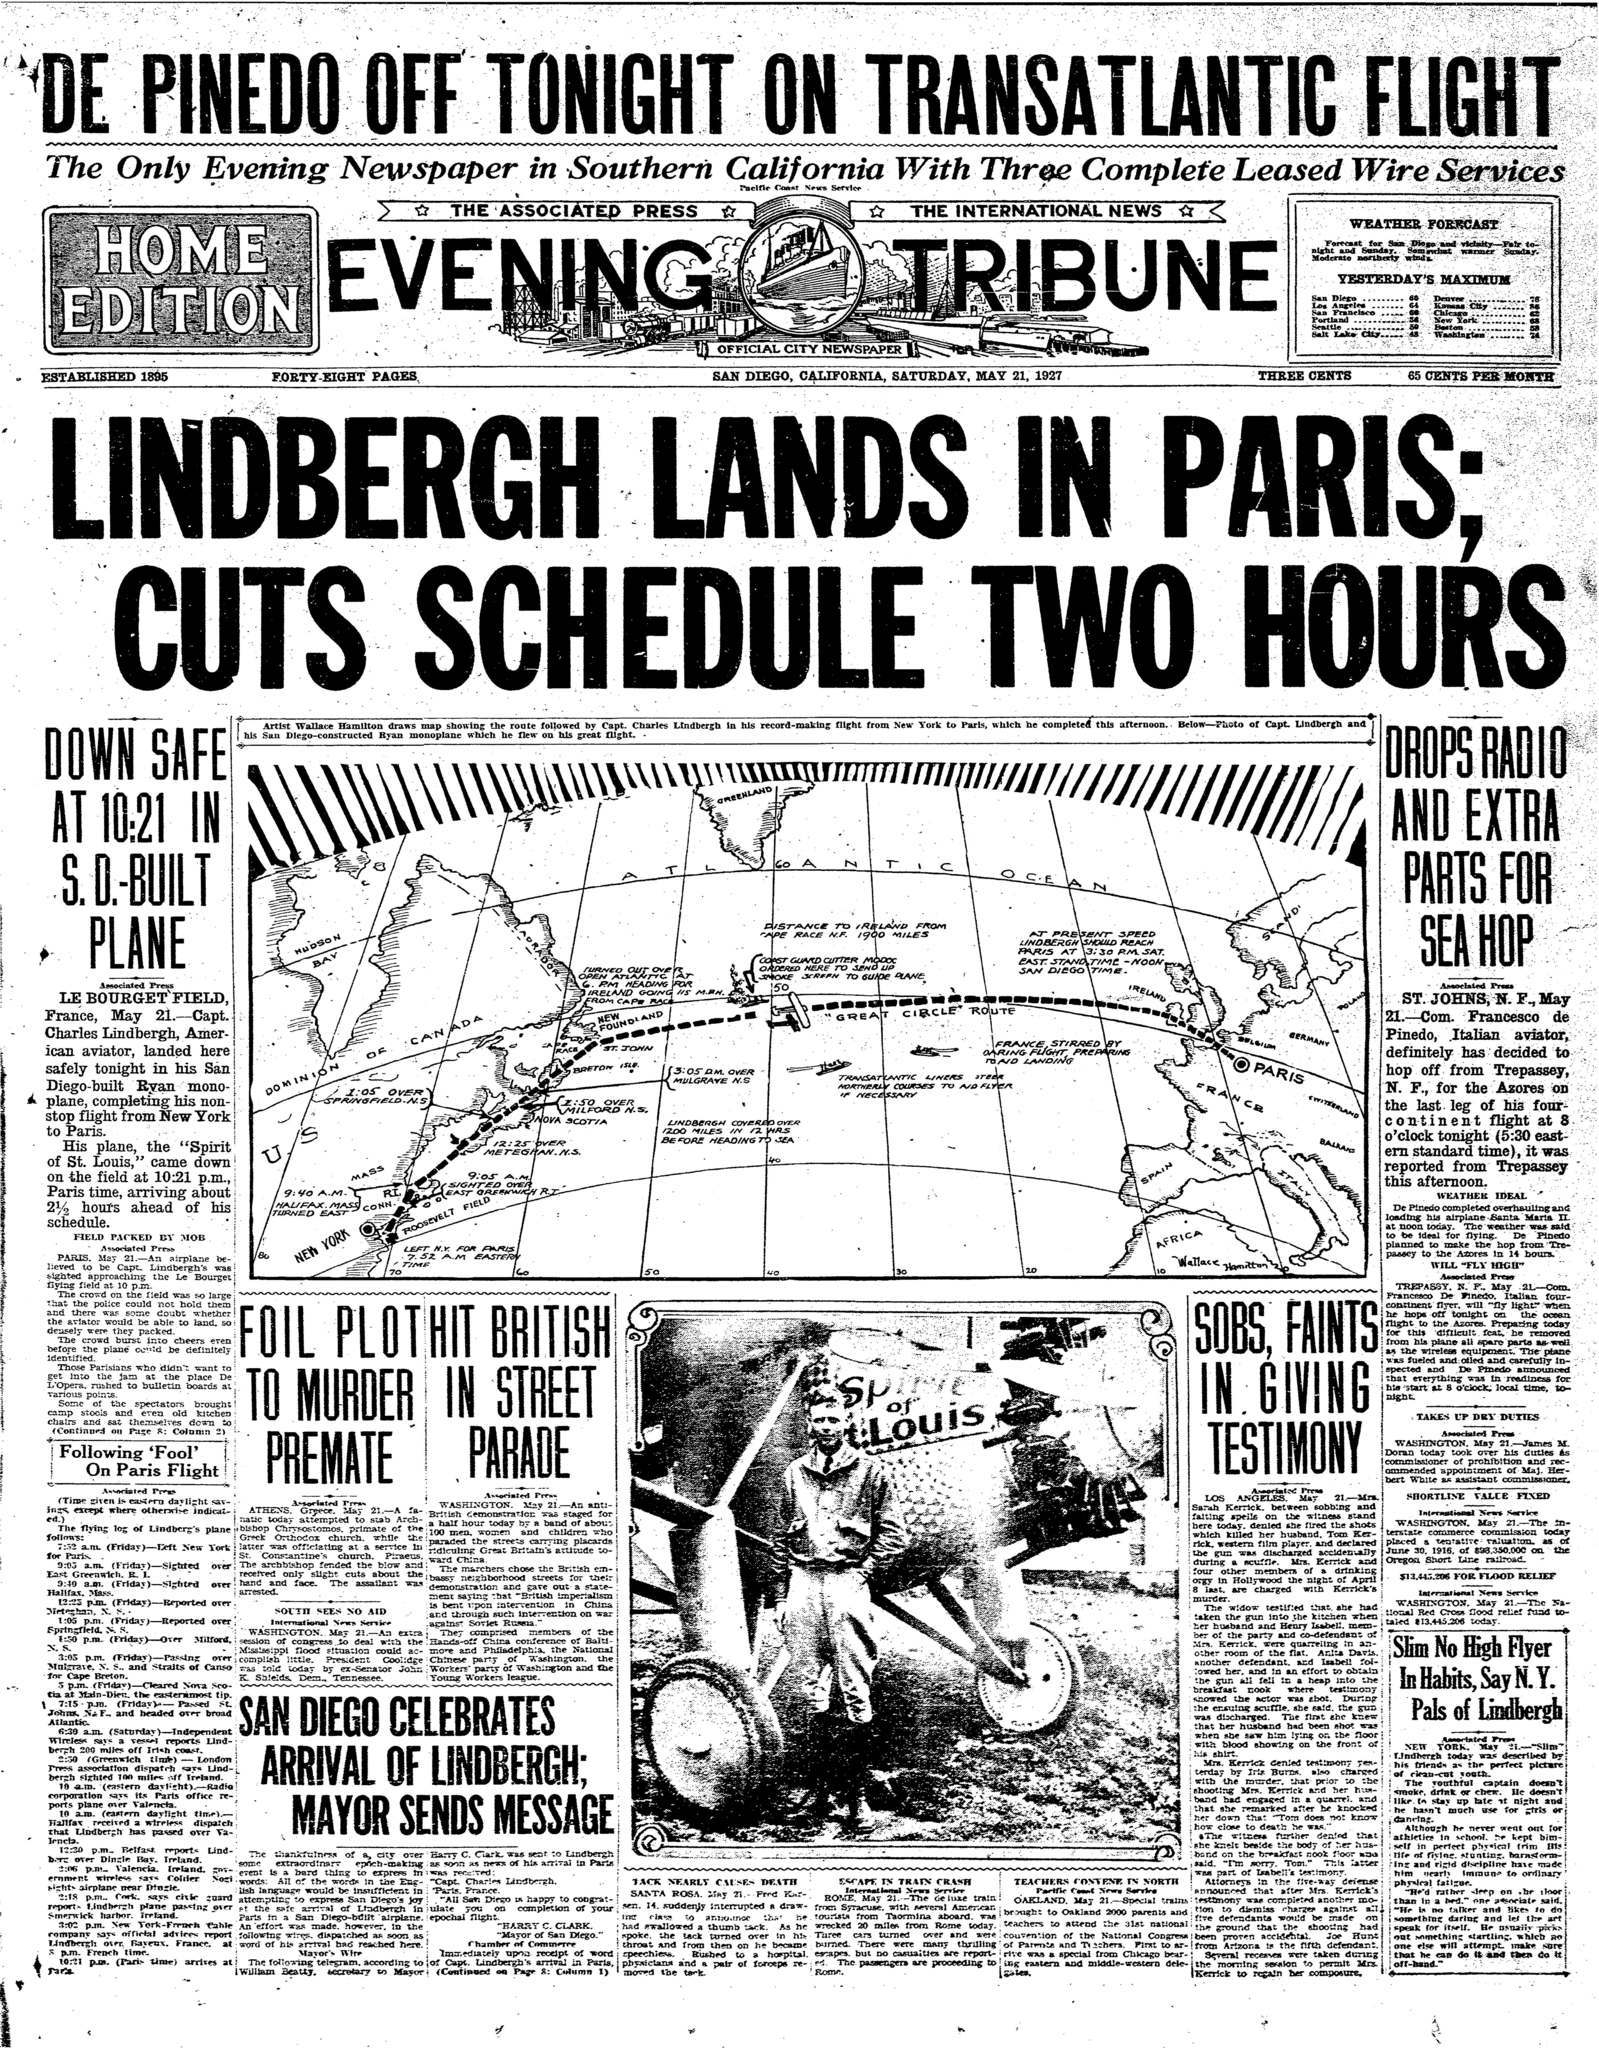 May 21, 1927: Lindbergh lands in Paris - The San Diego Union-Tribune